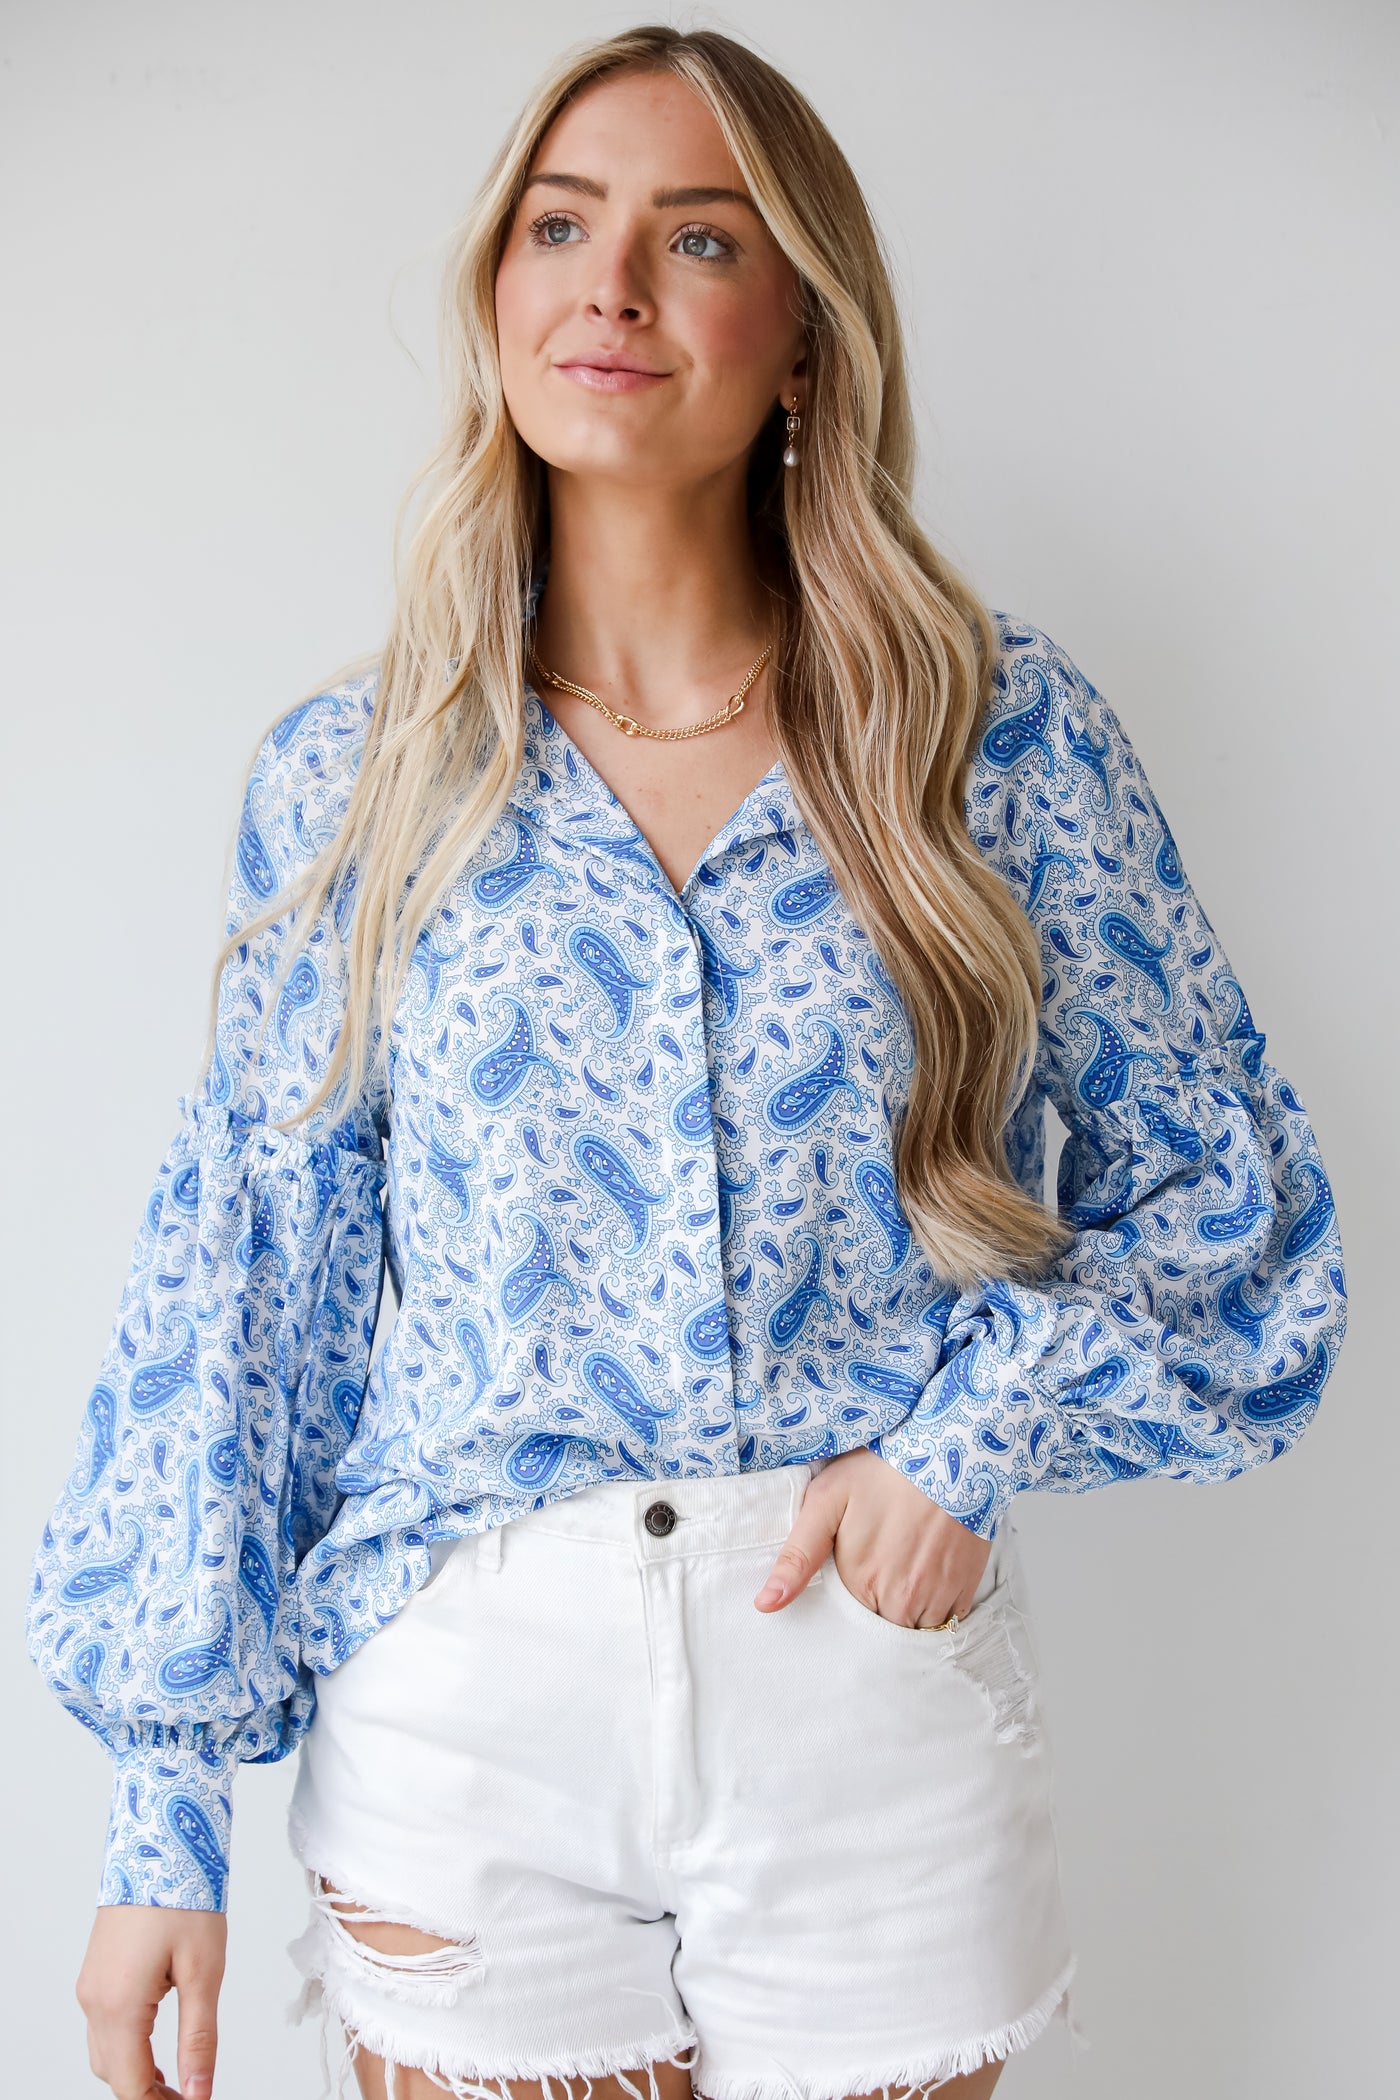 Blue Paisley Blouse for women, Blue Paisley Blouse, Truly Delightful Blue Paisley Blouse, Blue Paisley Top, Women's Top, Tops For Work